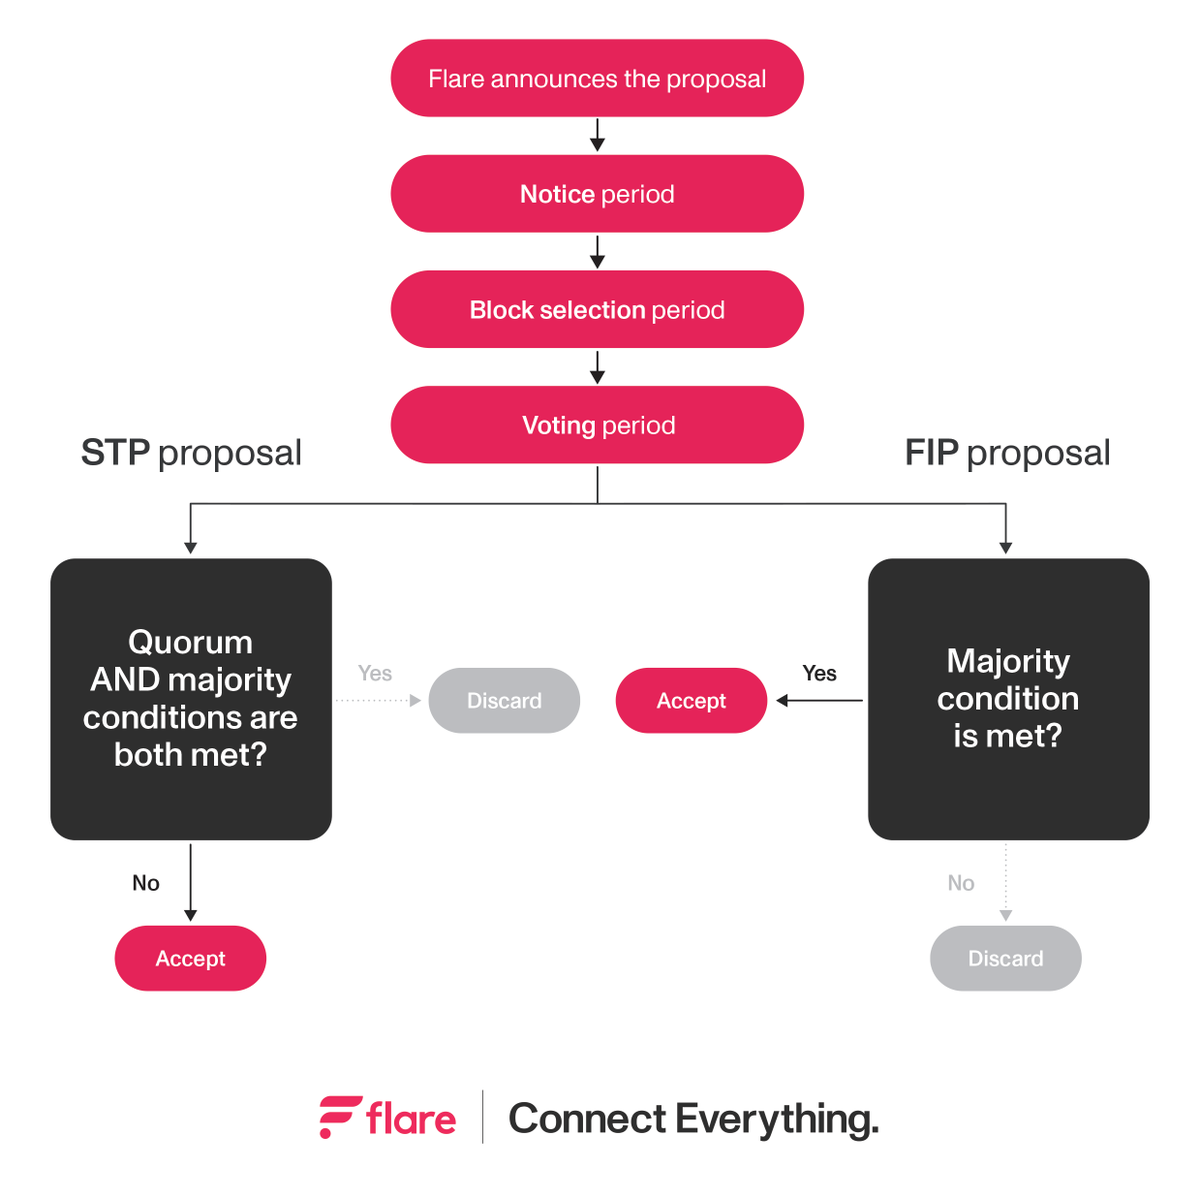 #Songbird community 🐦

Are you ready to vote for the latest proposal for FTSO fast updates?

See how voting works below.

Voting period: May 20 -May 26

If it passes, it goes to the #Flare community for a vote 🗳️